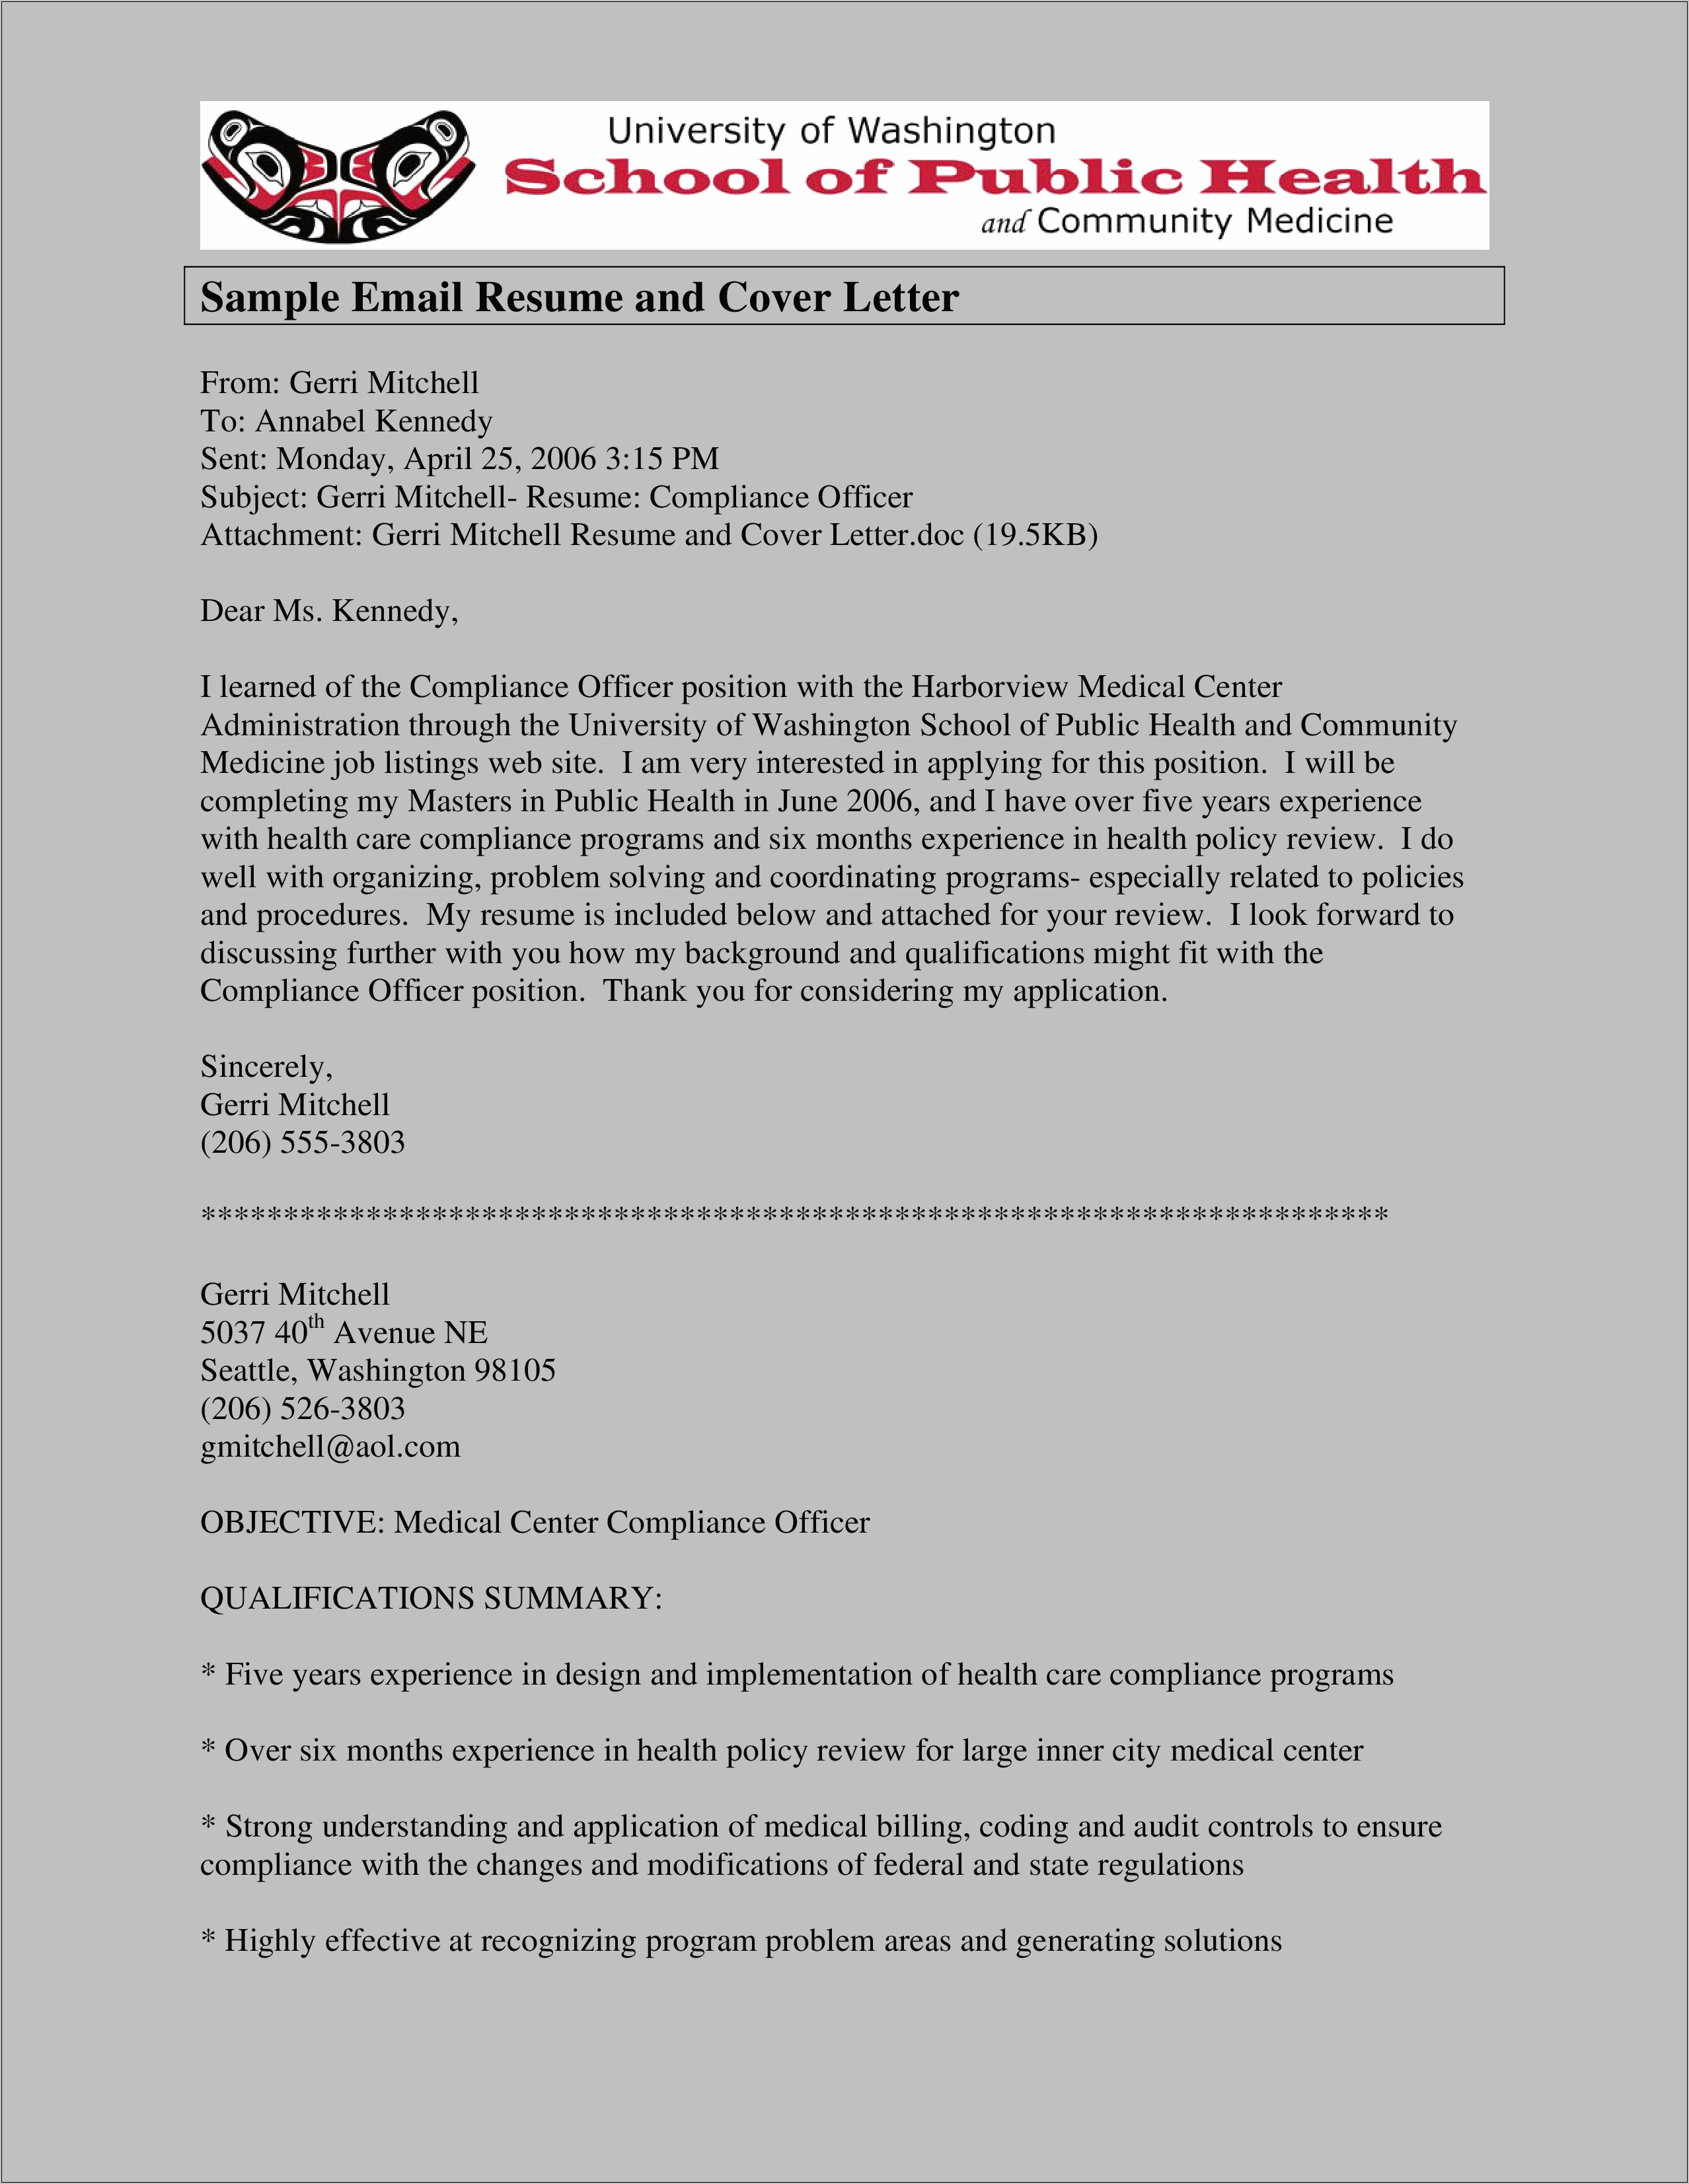 Email Message For Resume And Cover Letter